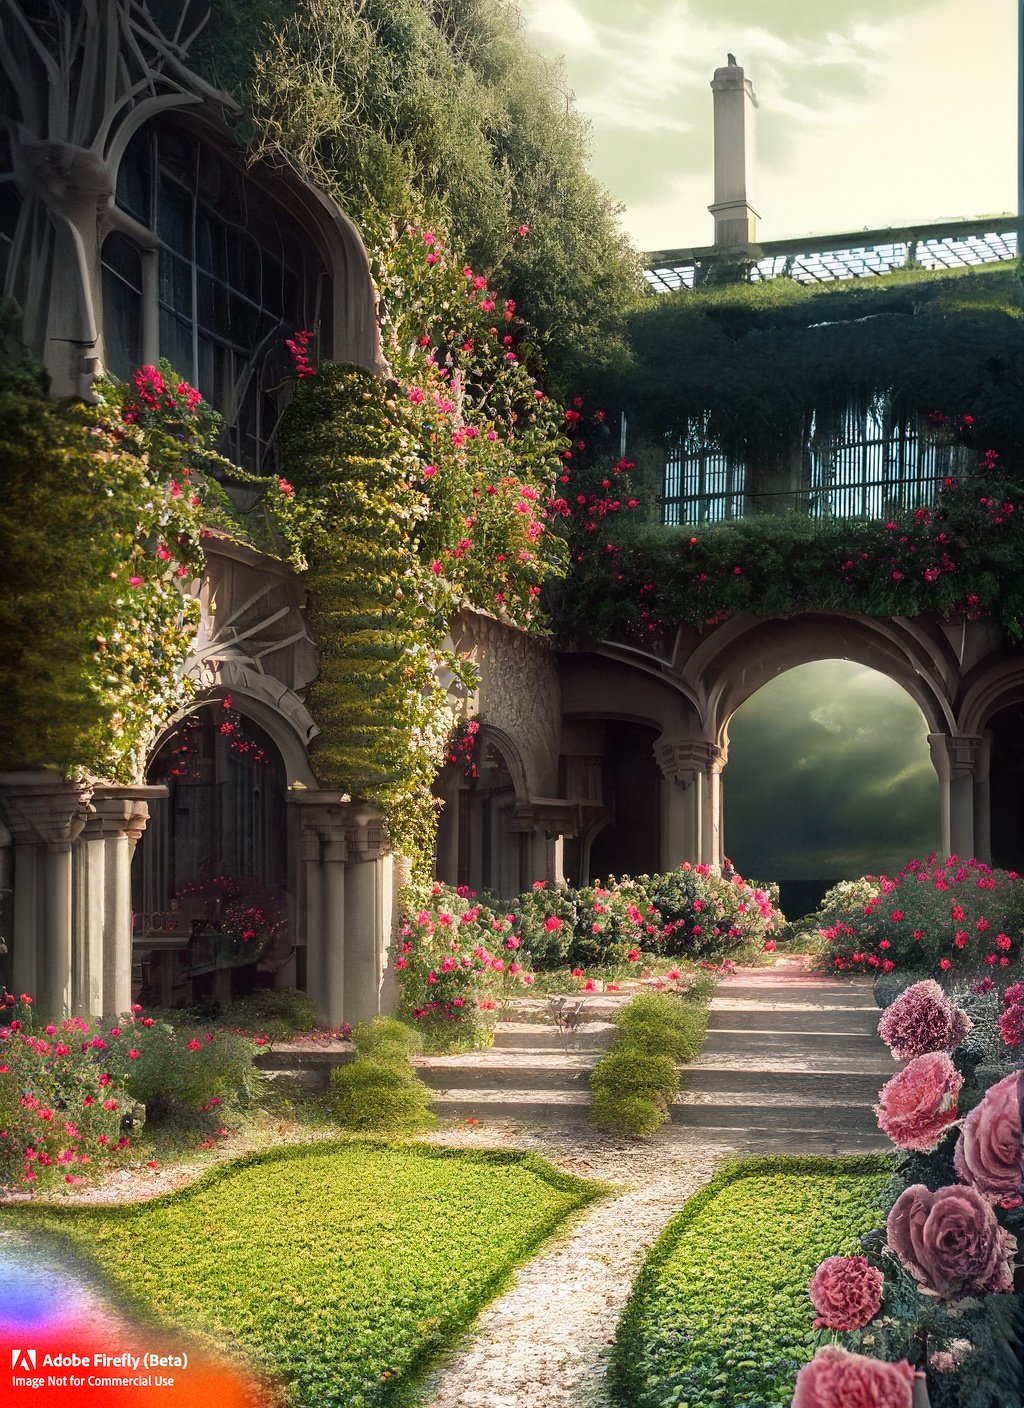 Firefly_a+court of thorns and roses, mansion with vines, garden courtyard_photo_47407.jpg